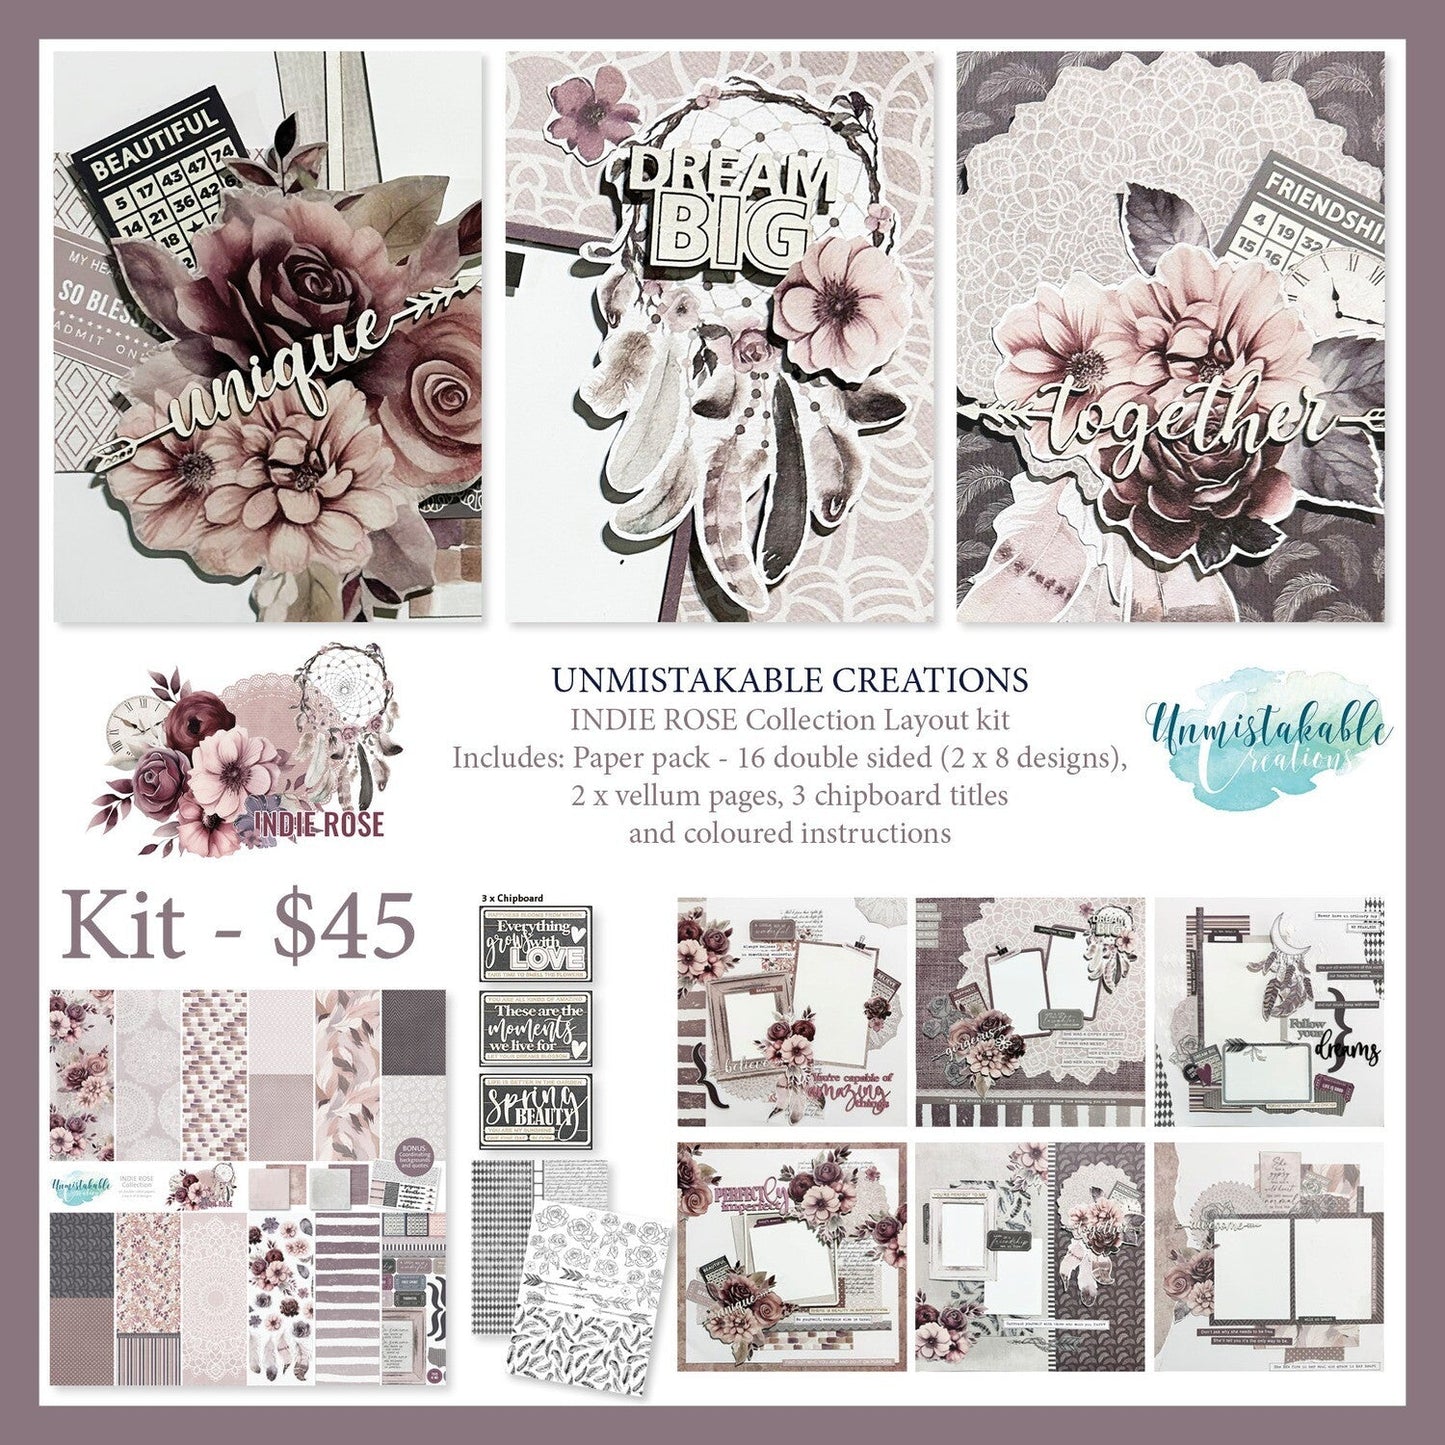 Unmistakable Creations - INDIE ROSE Collection Layout Kit - The Crafty Kiwi